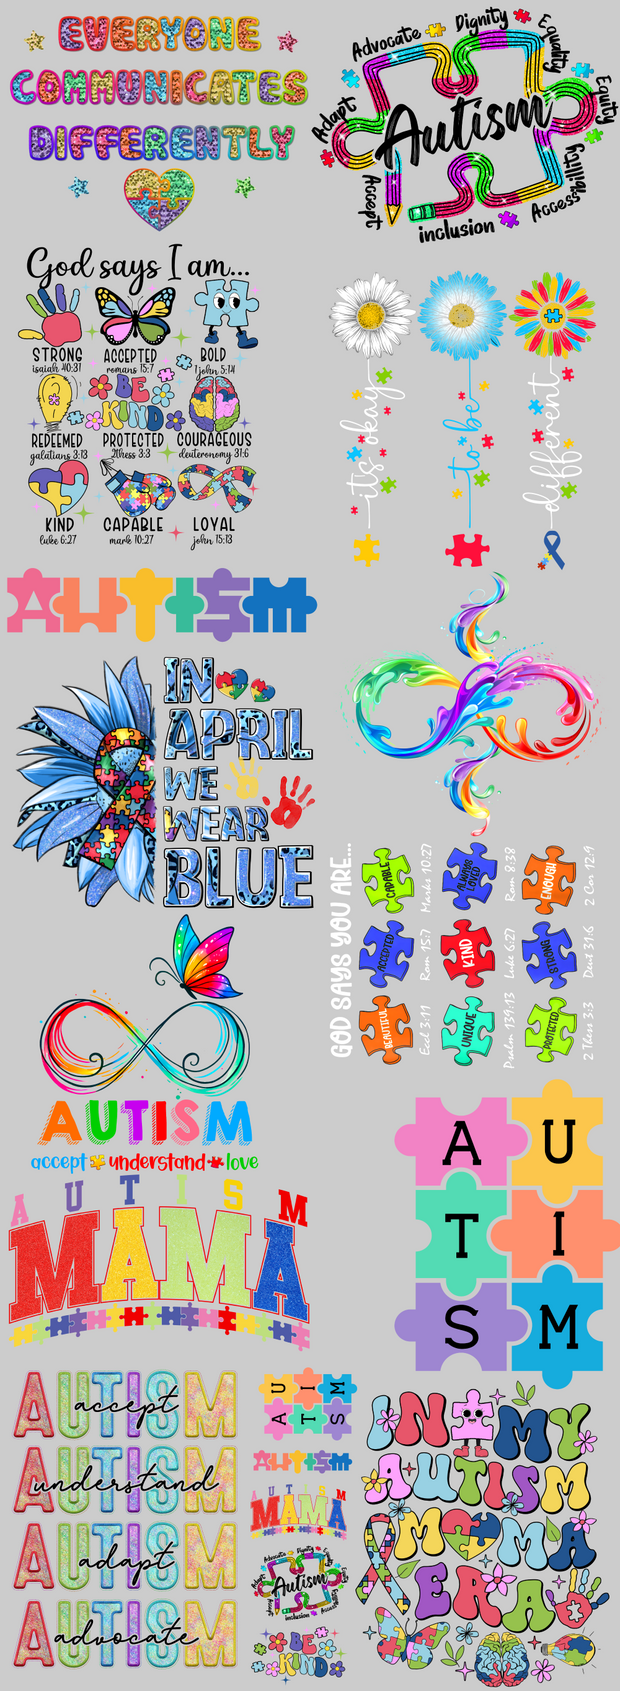 Autism Awareness III with Adult and Pocket Sizes 60" DTF Ready to Ship Gang Sheet